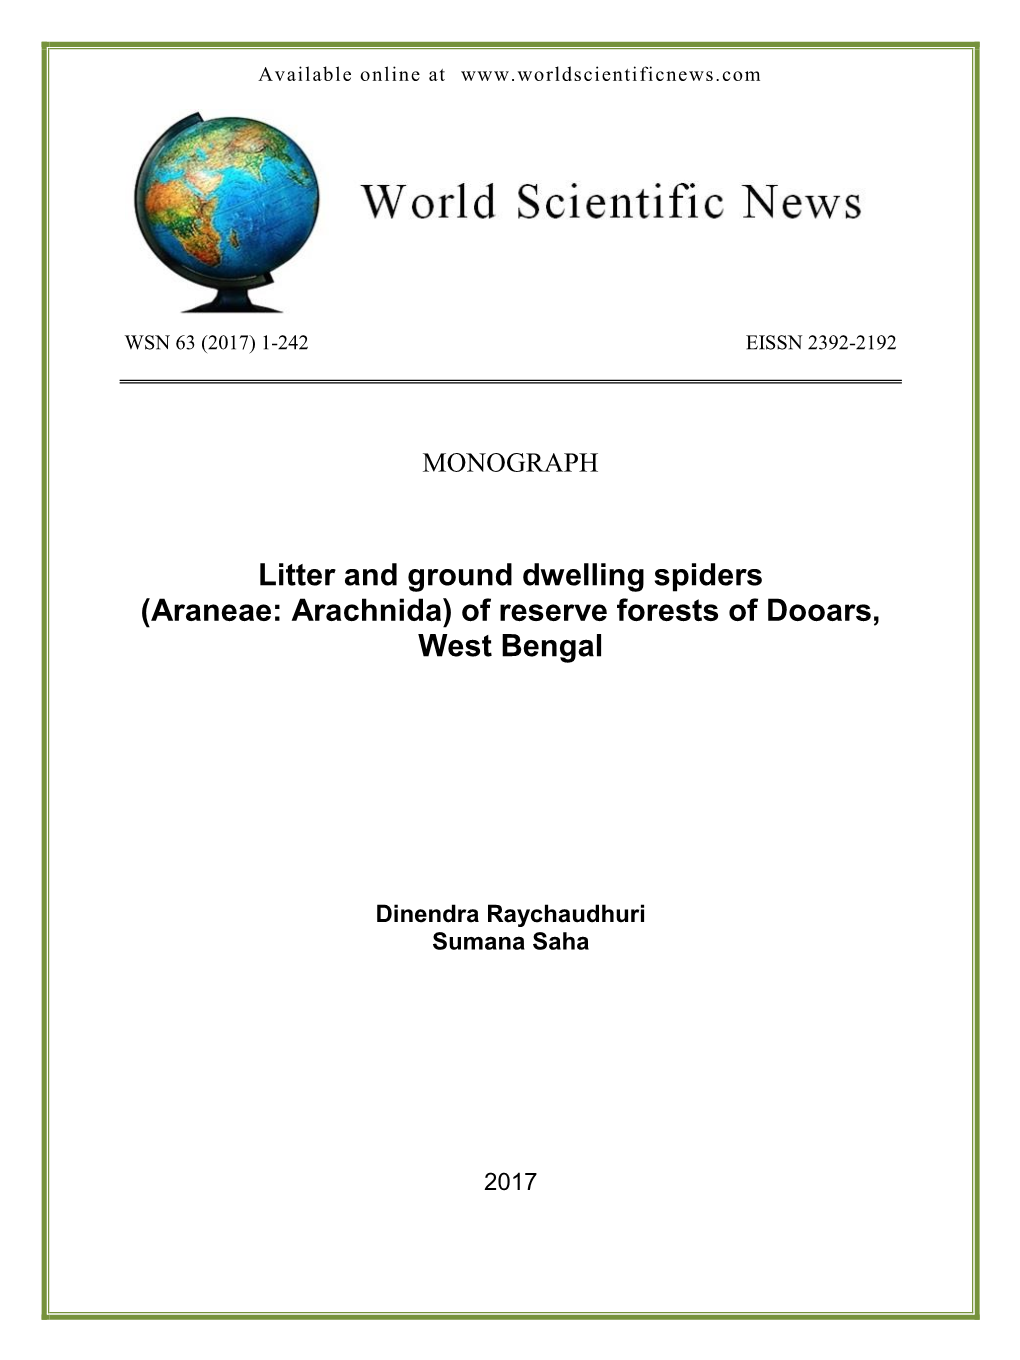 Litter and Ground Dwelling Spiders (Araneae: Arachnida) of Reserve Forests of Dooars, West Bengal